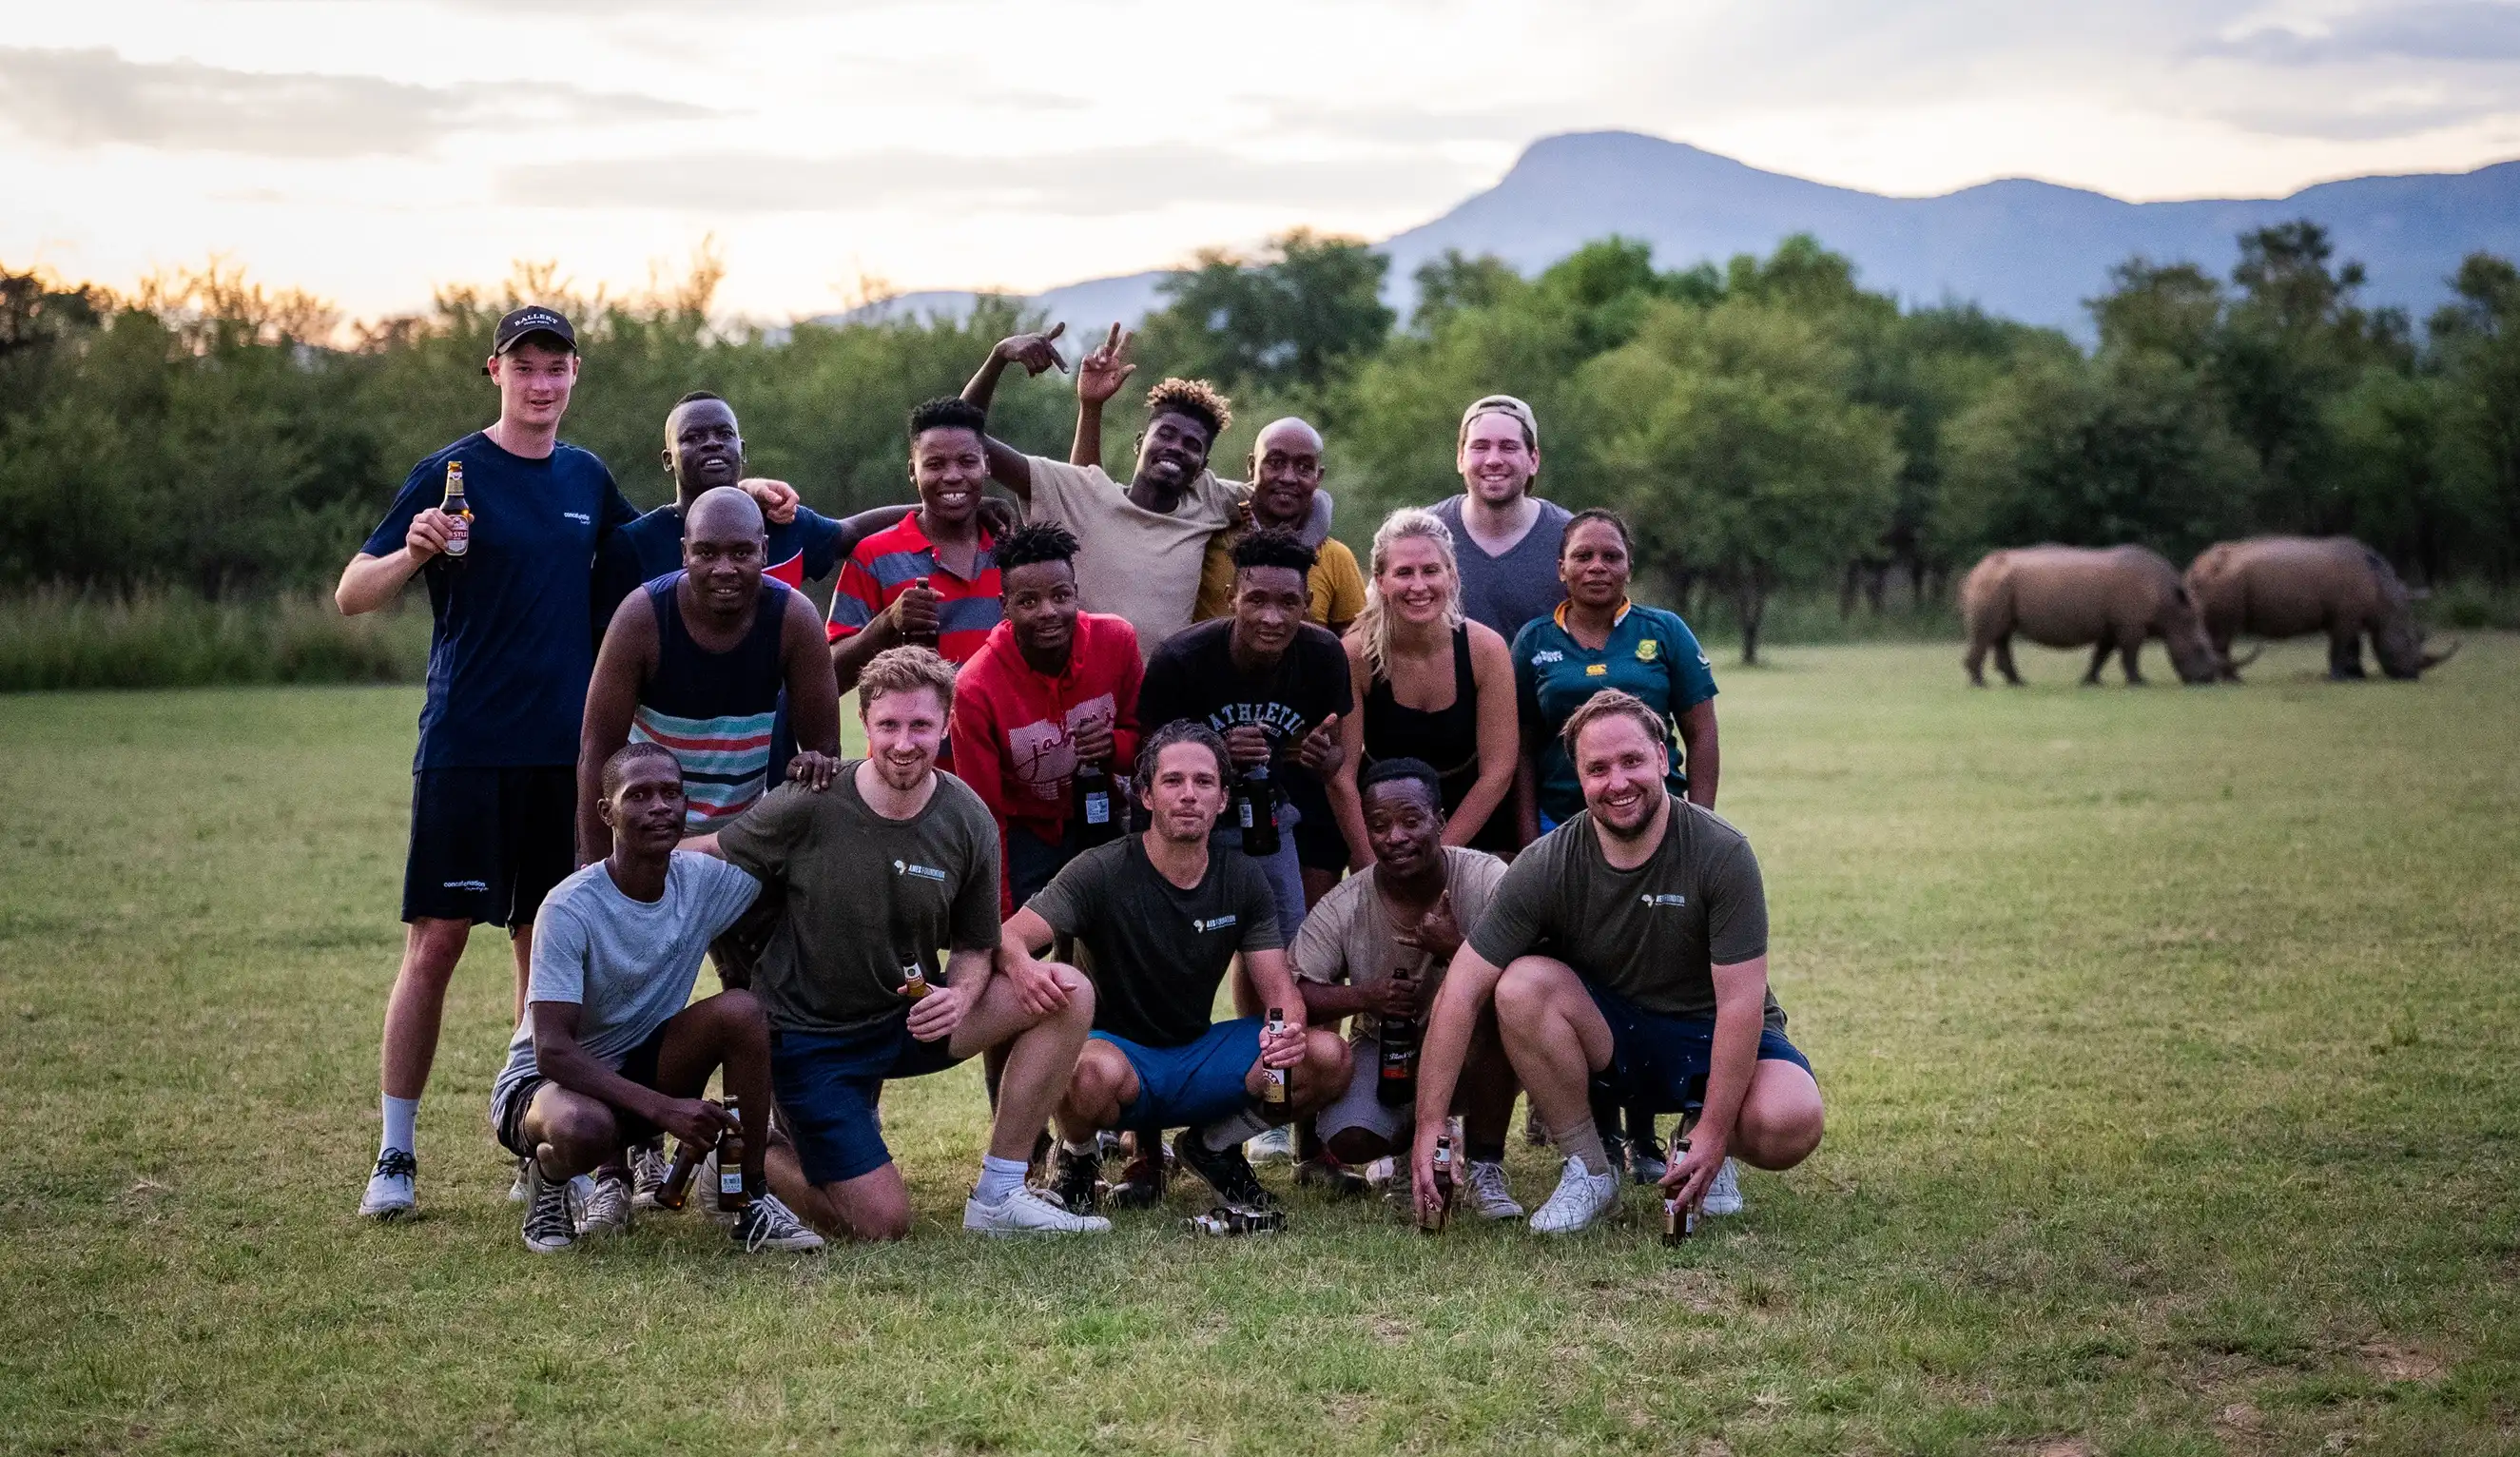 Large team posing with drinks, while two rhinos graze in the background